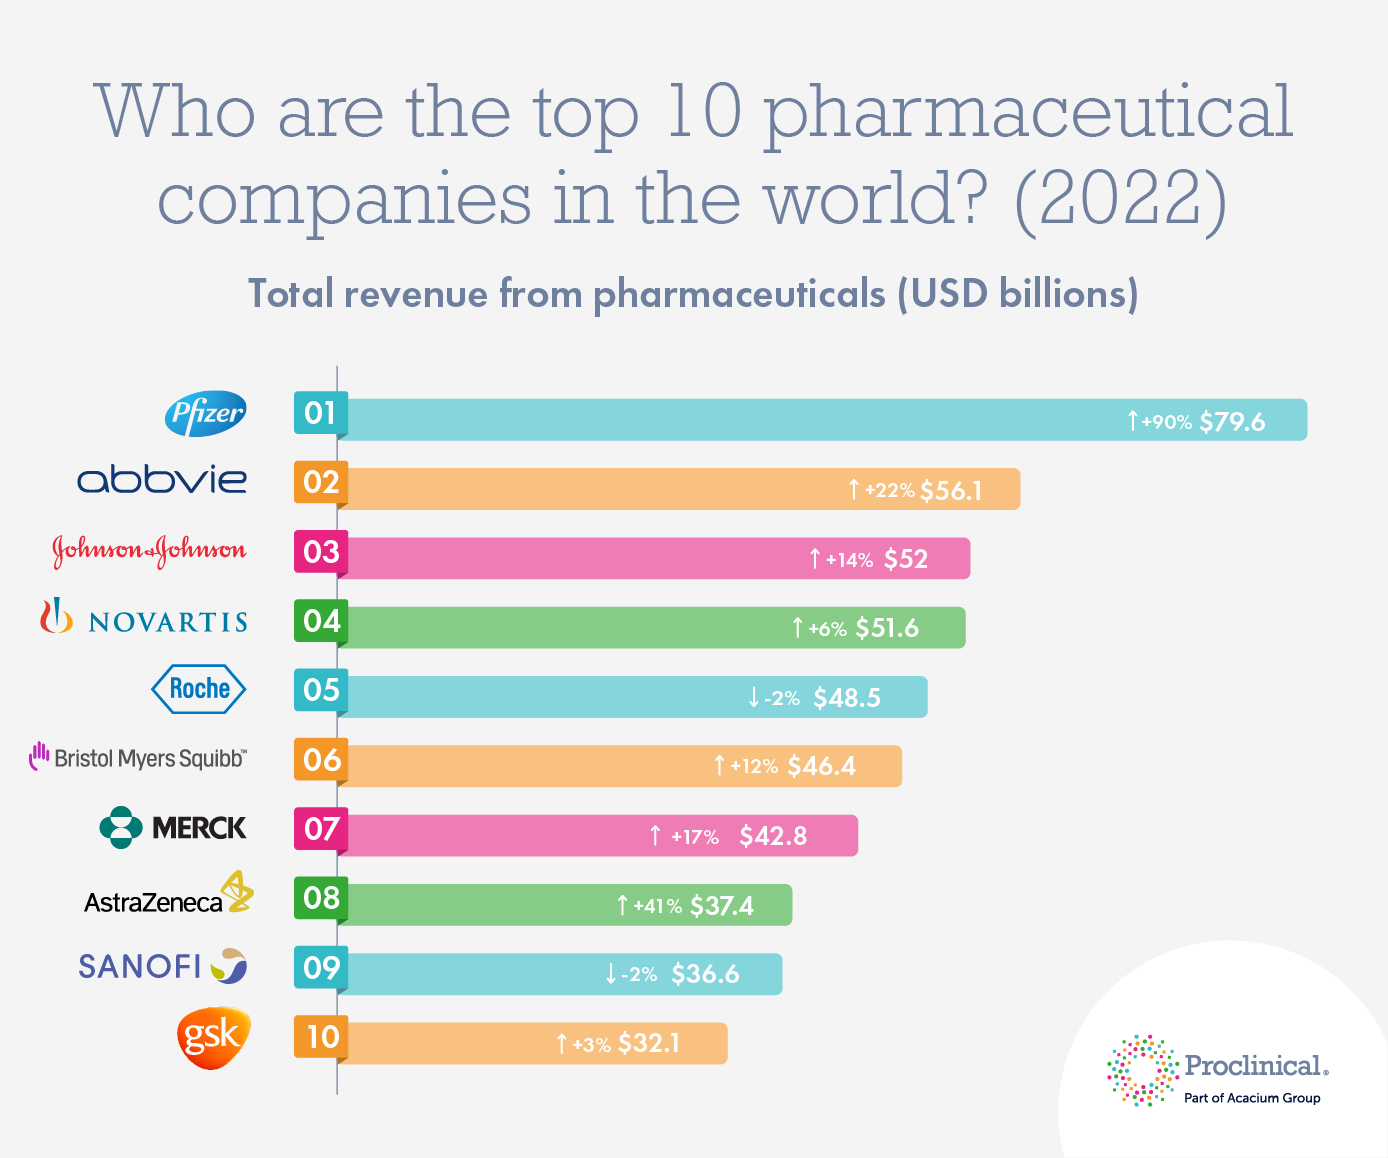 Is Pfizer a top pharmaceutical company?